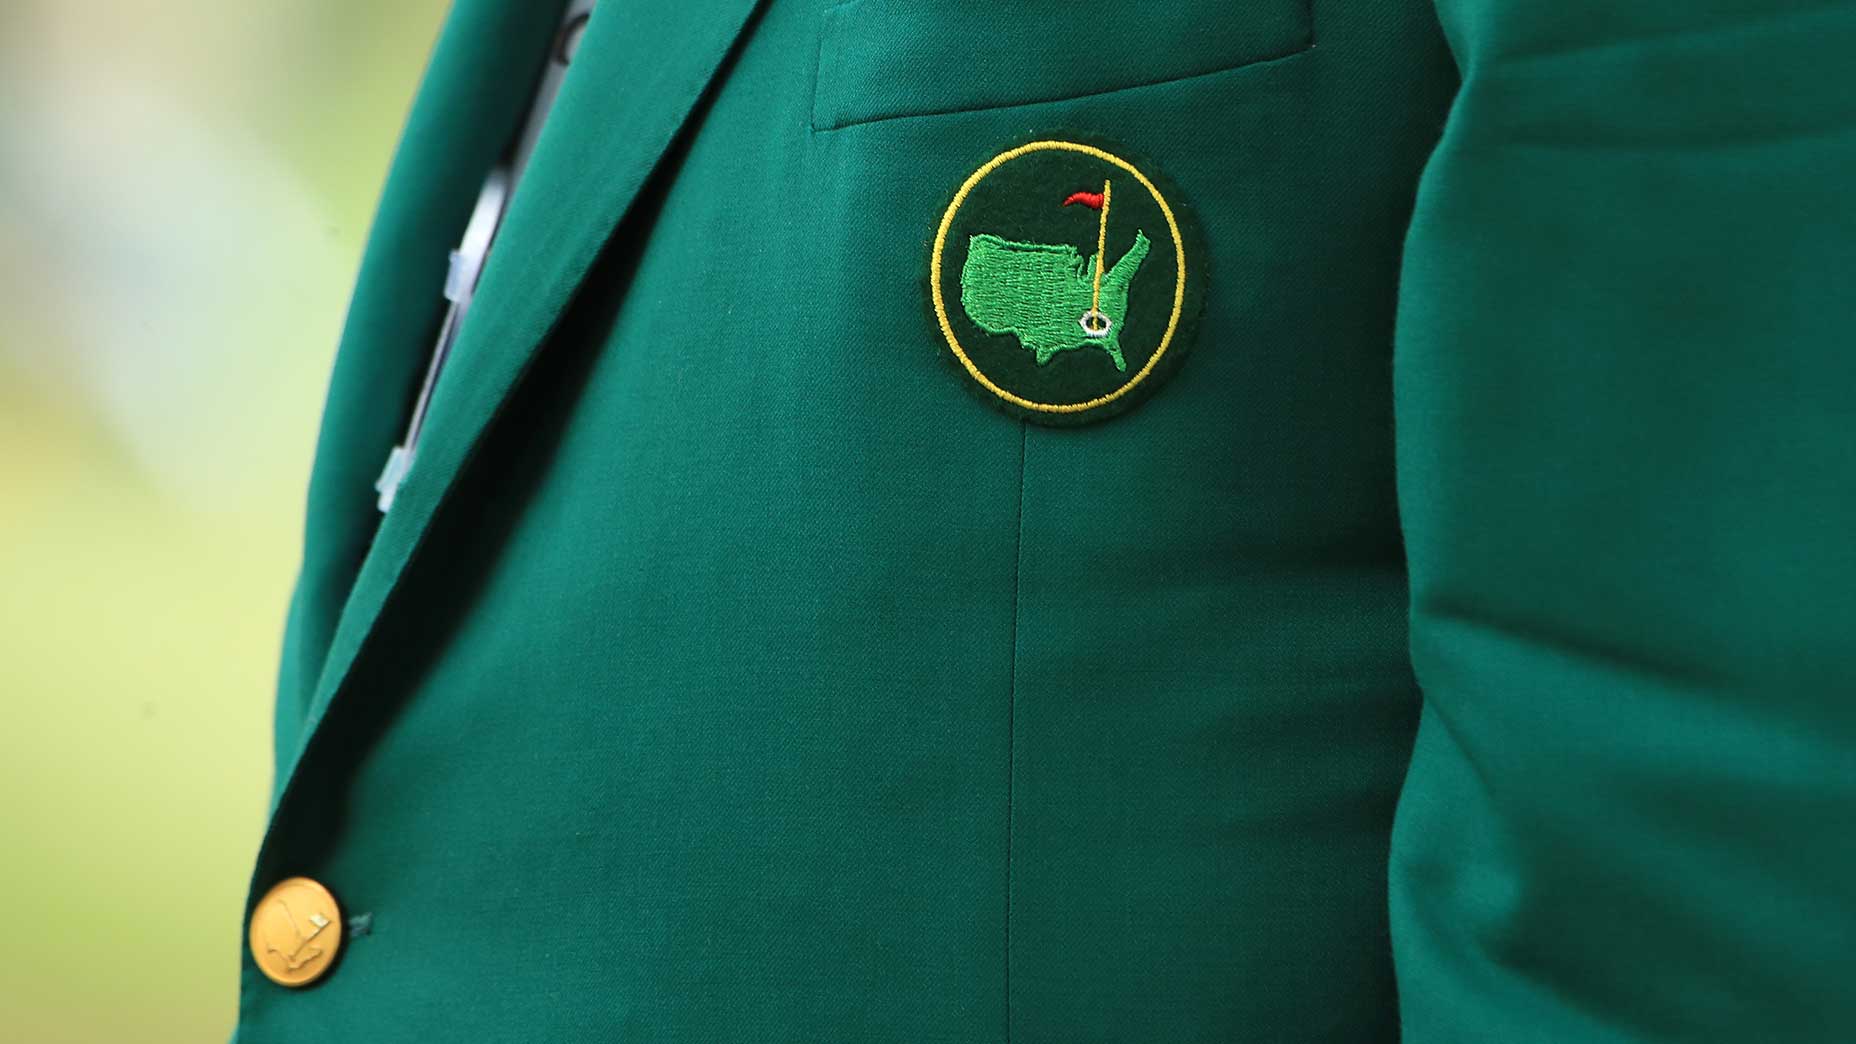 Secrets of the Masters green jacket only winners know about